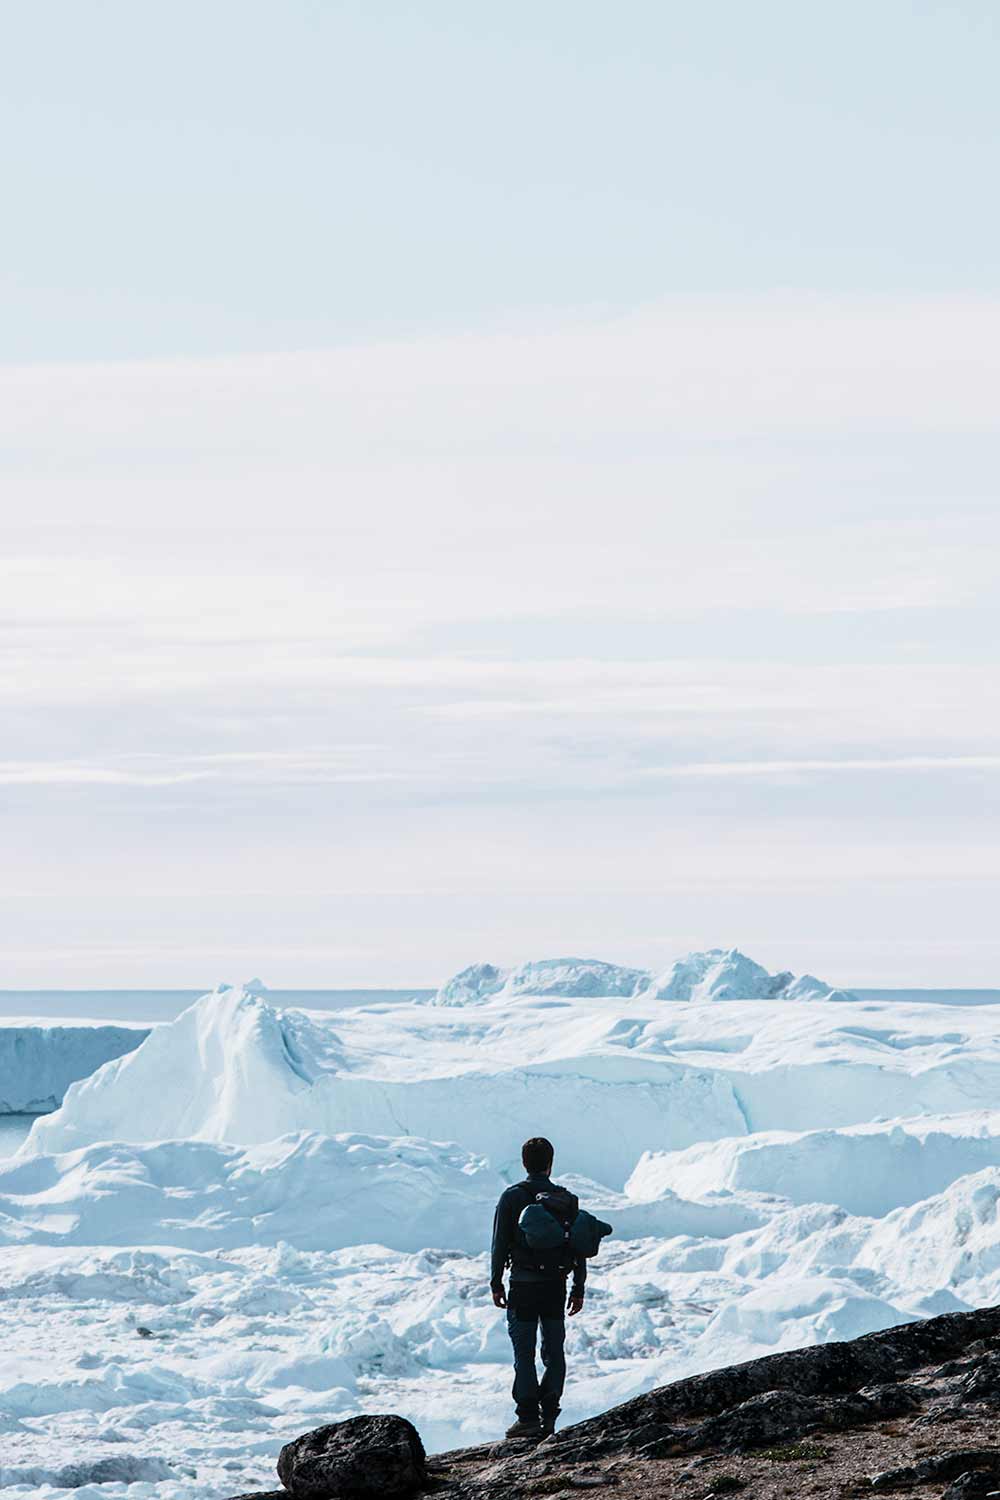 Vacation at Ilulissat Icefjord: Marvel at its grandeur on a 10-day journey in Greenland